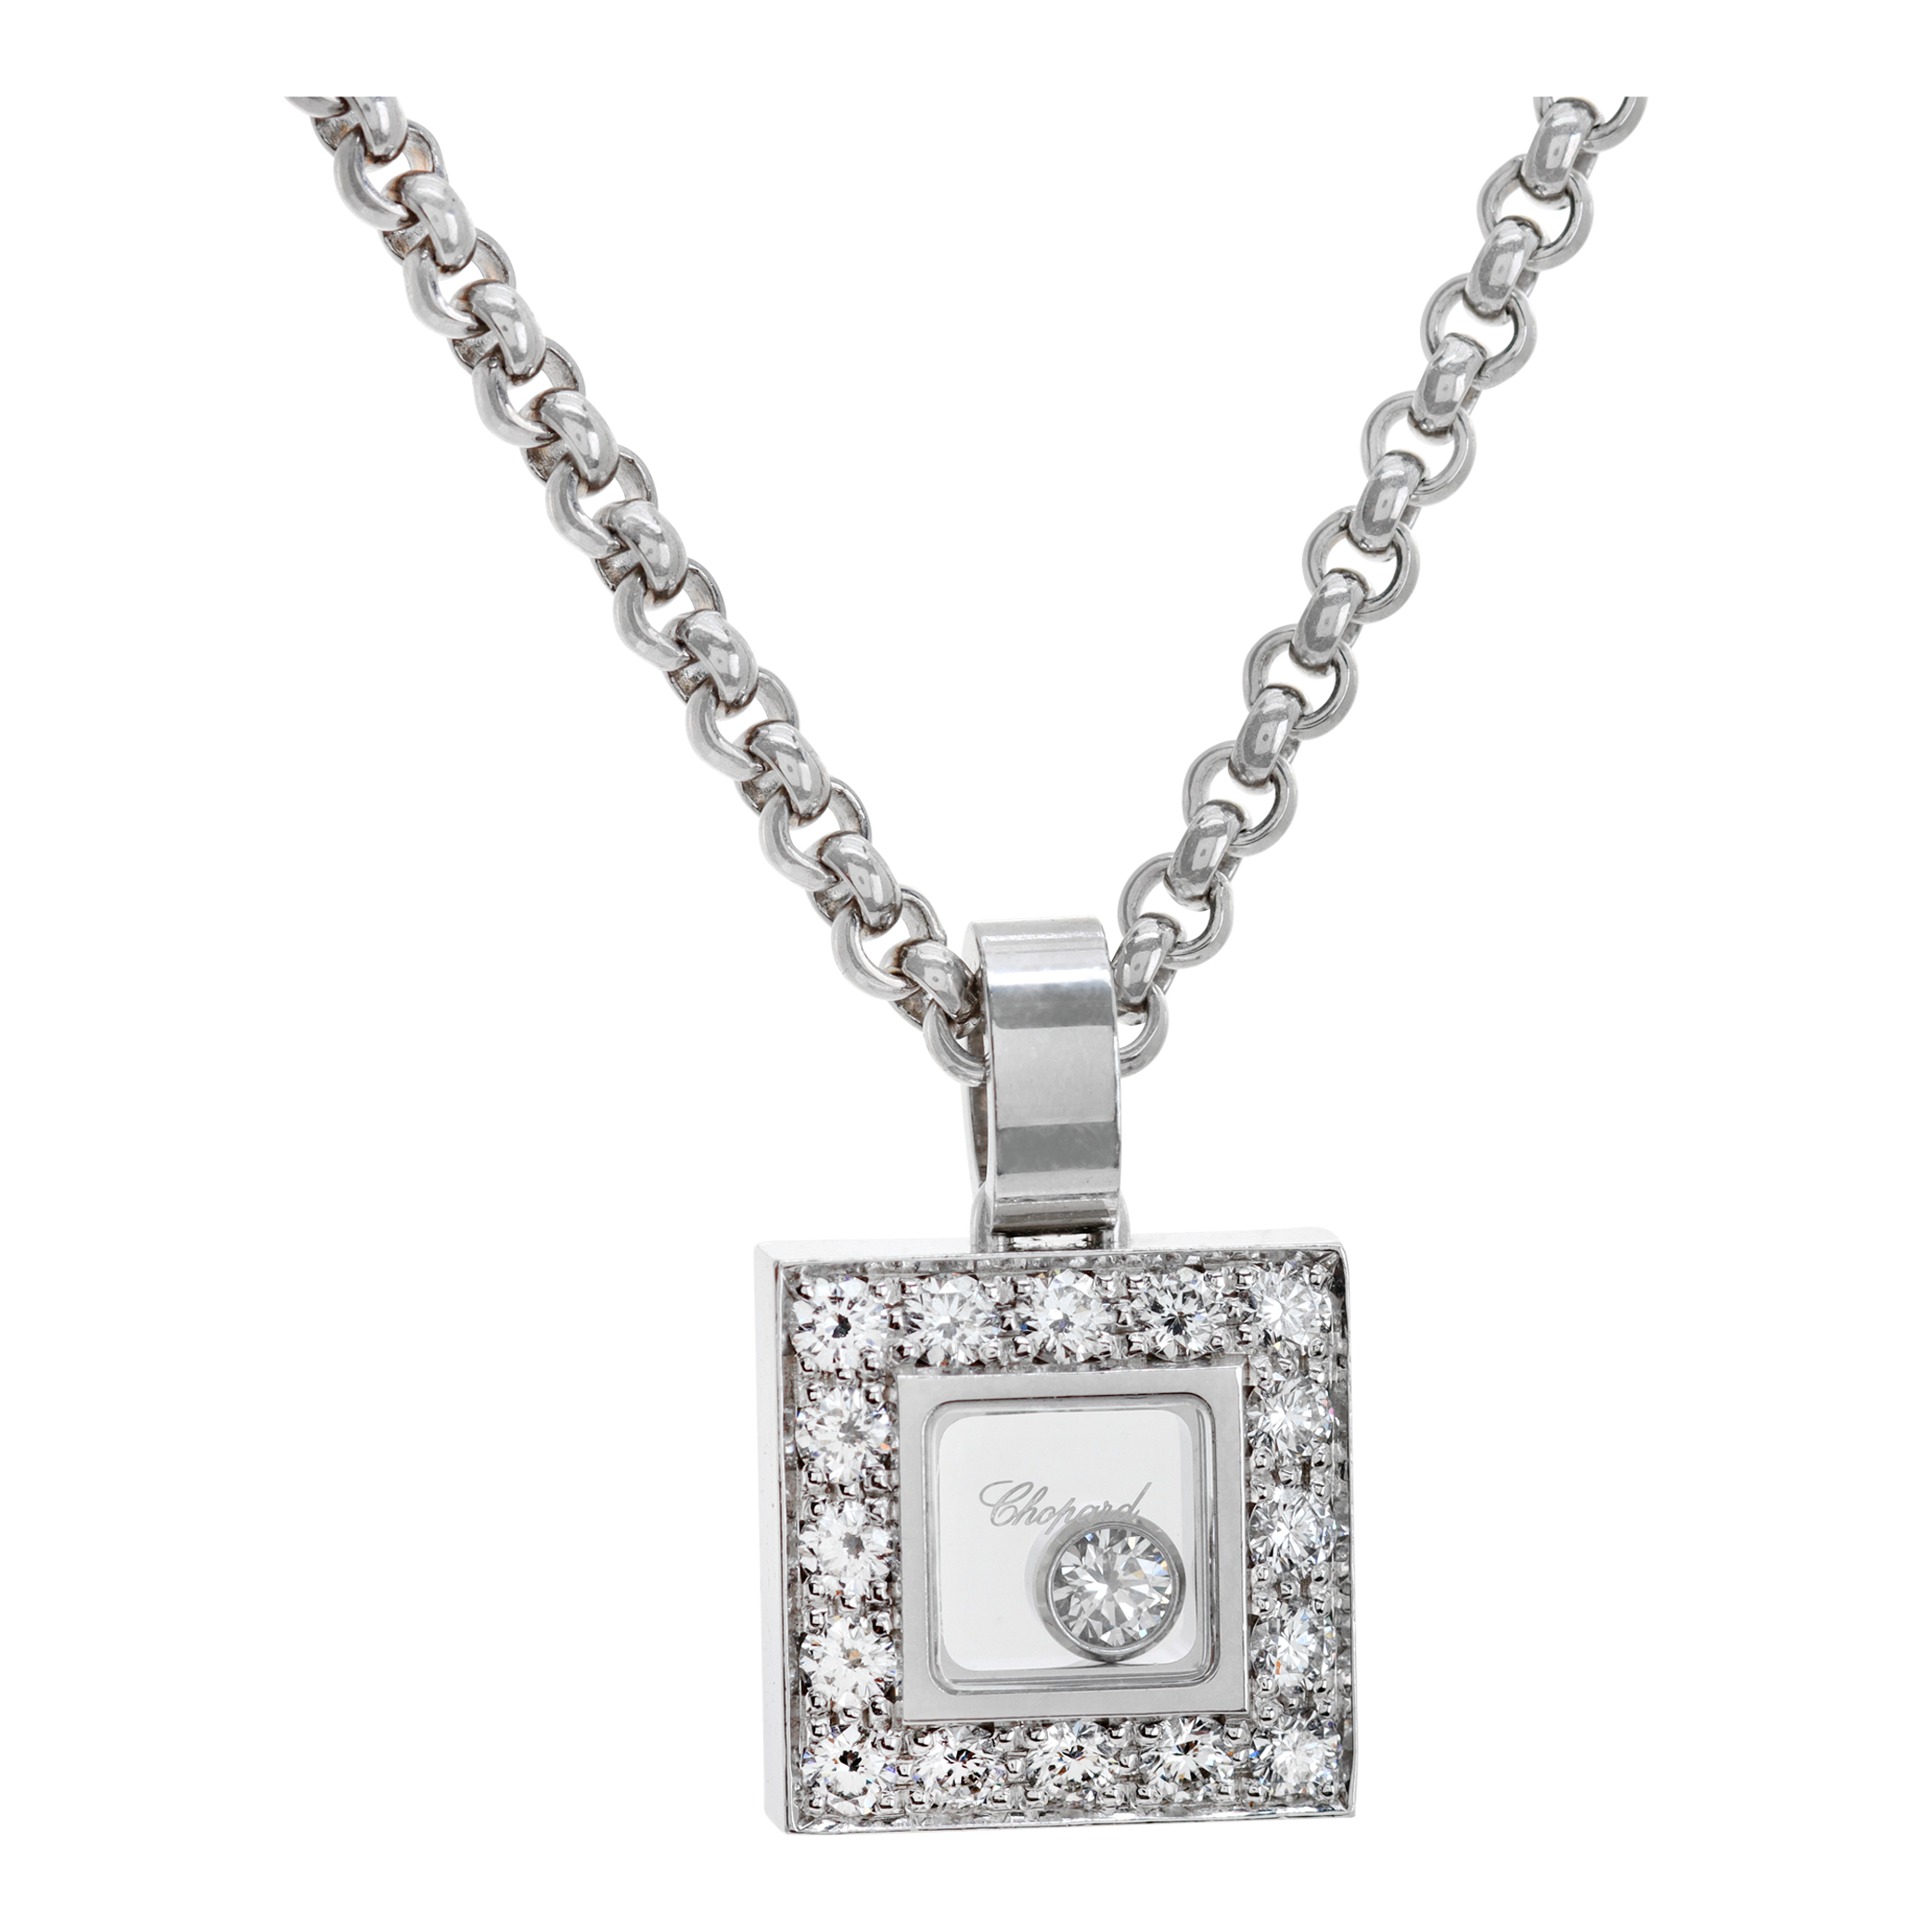 Chopard diamond cube pendant in 18k white gold with floating diamond